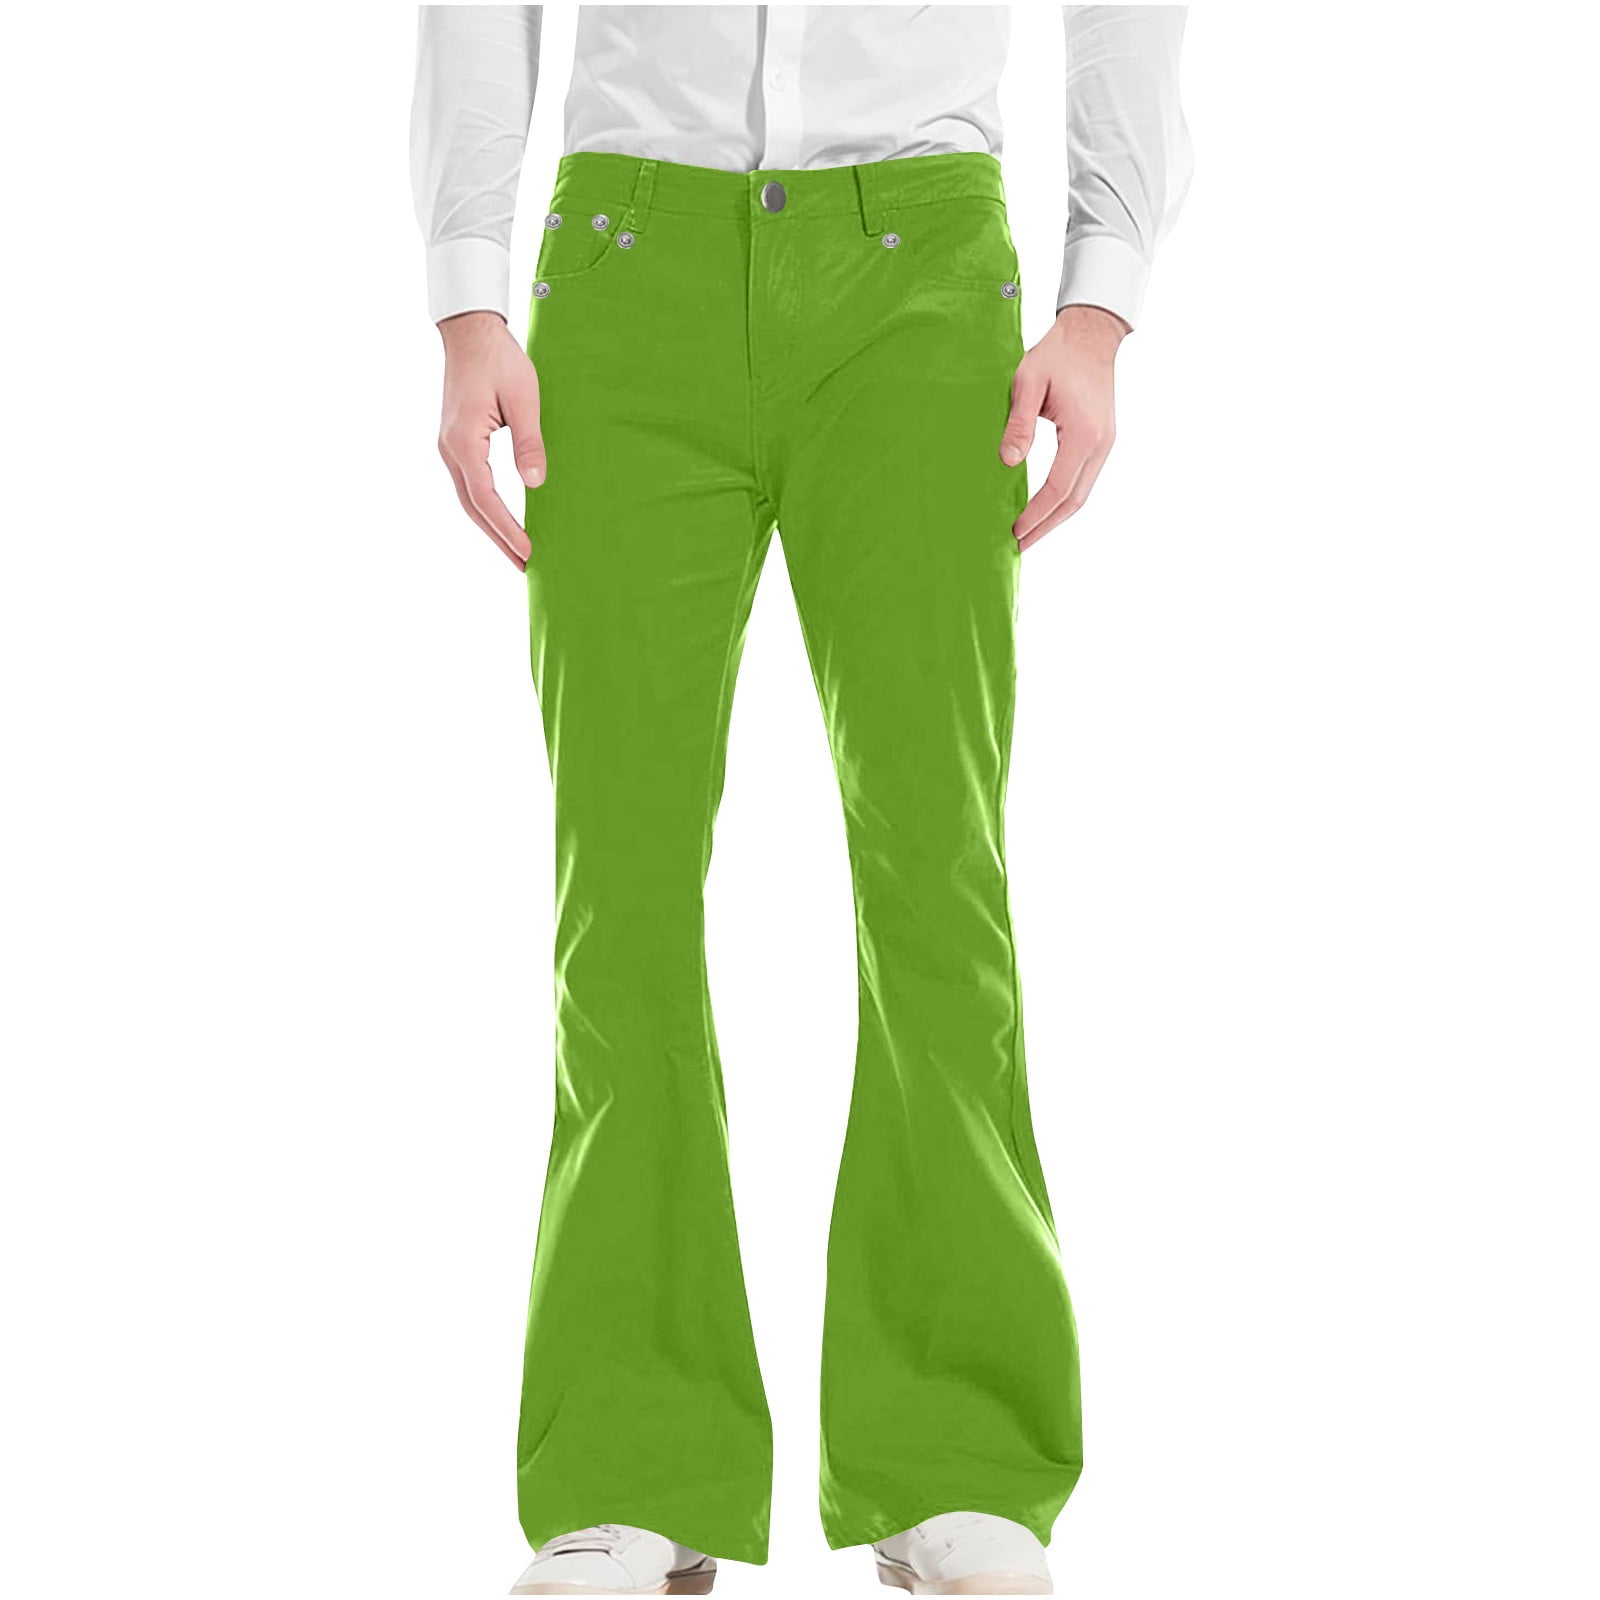 RYRJJ Men's Vintage 60s 70s Bell Bottom Pants Stretch Classic Comfort Chino  Flared Pants Retro Formal Dress Bootcut Trousers(Green,M)